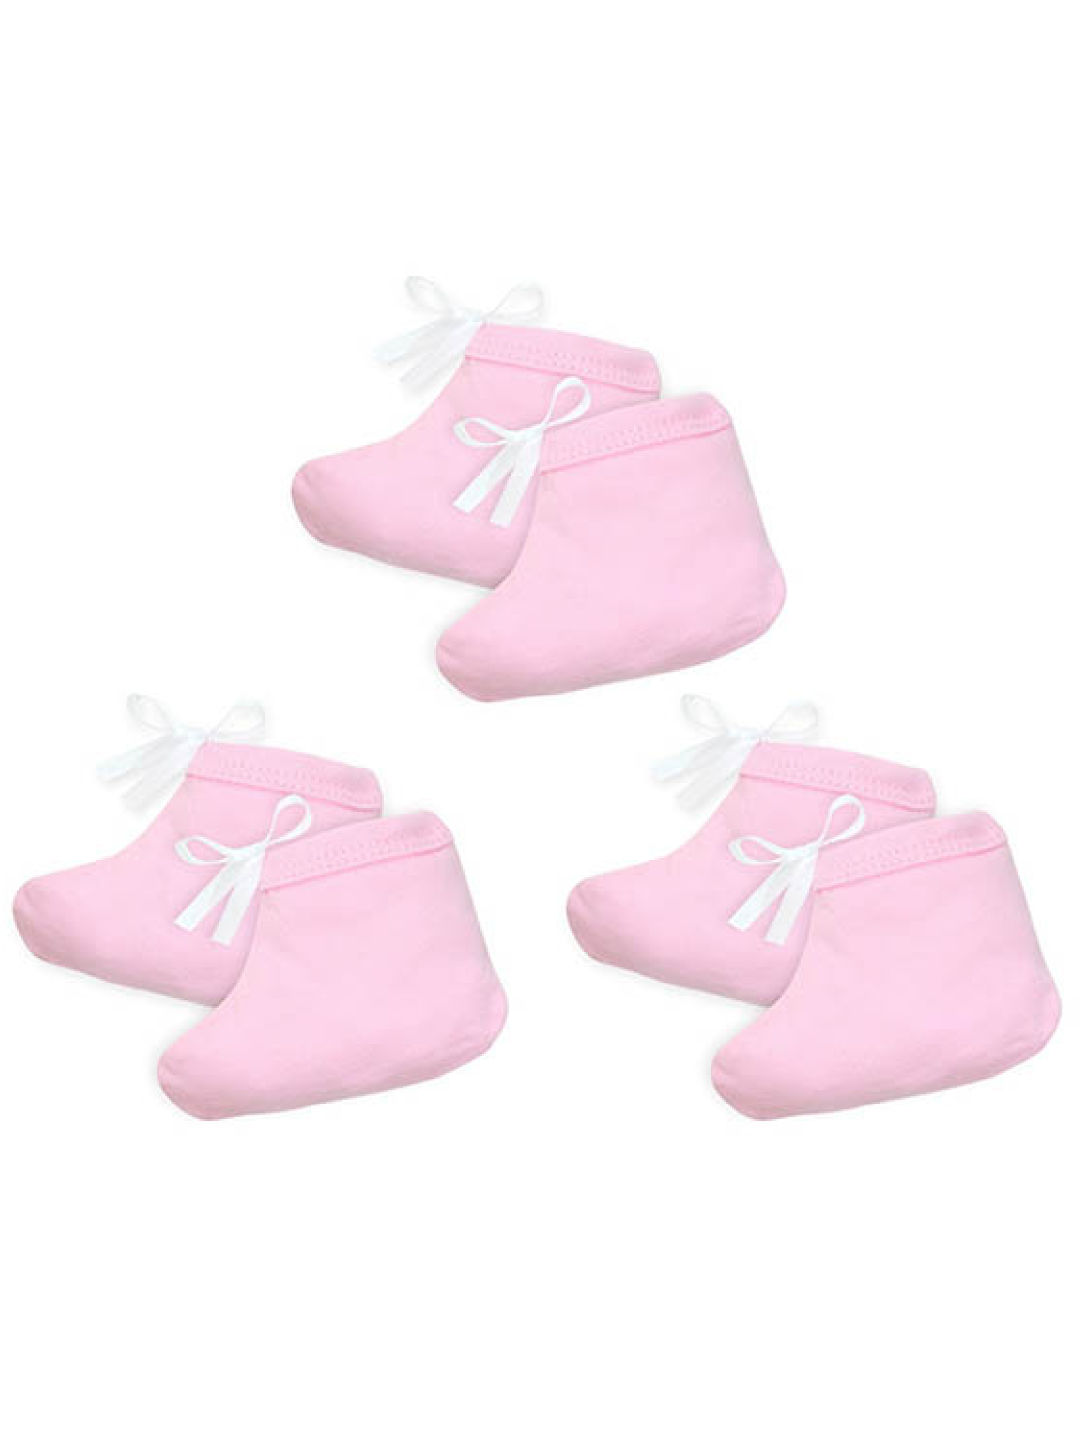 Cotton Stuff Booties with String - 3 pairs